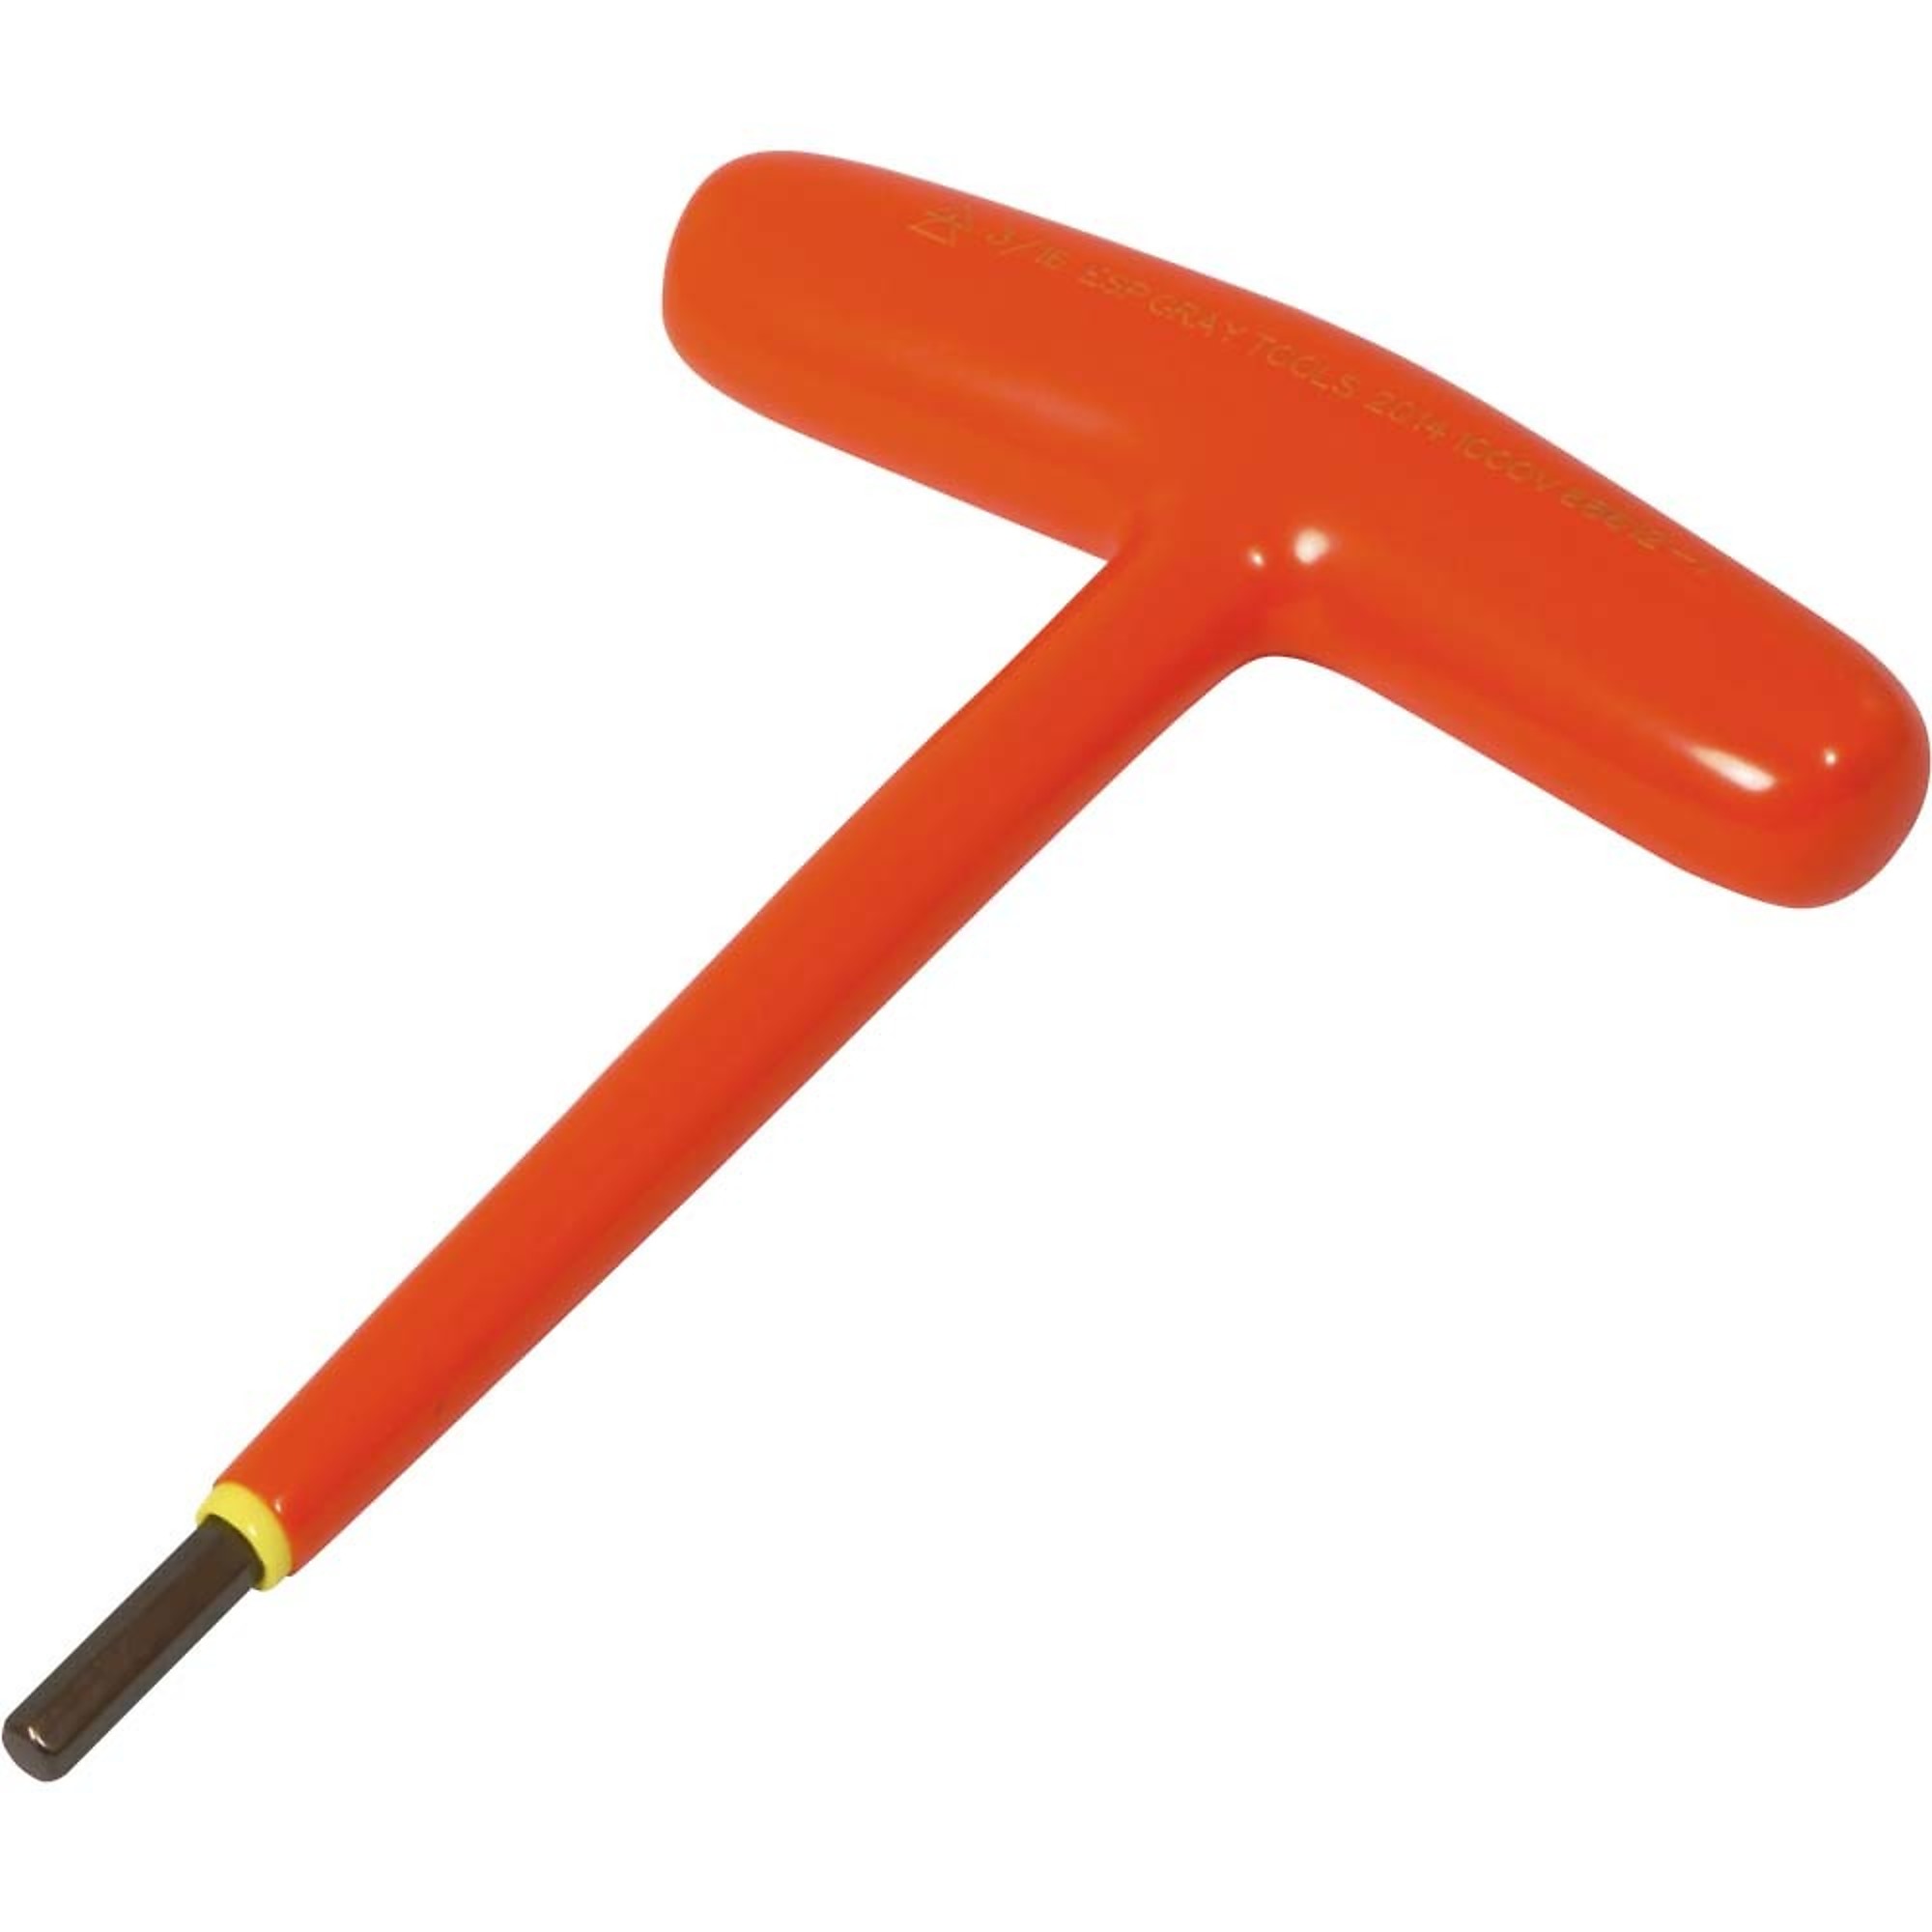 Gray Tools, 3/16Inch S2 T-handle Hex Key, 1000V Insulated, Pieces (qty.) 1 Model 68612-I